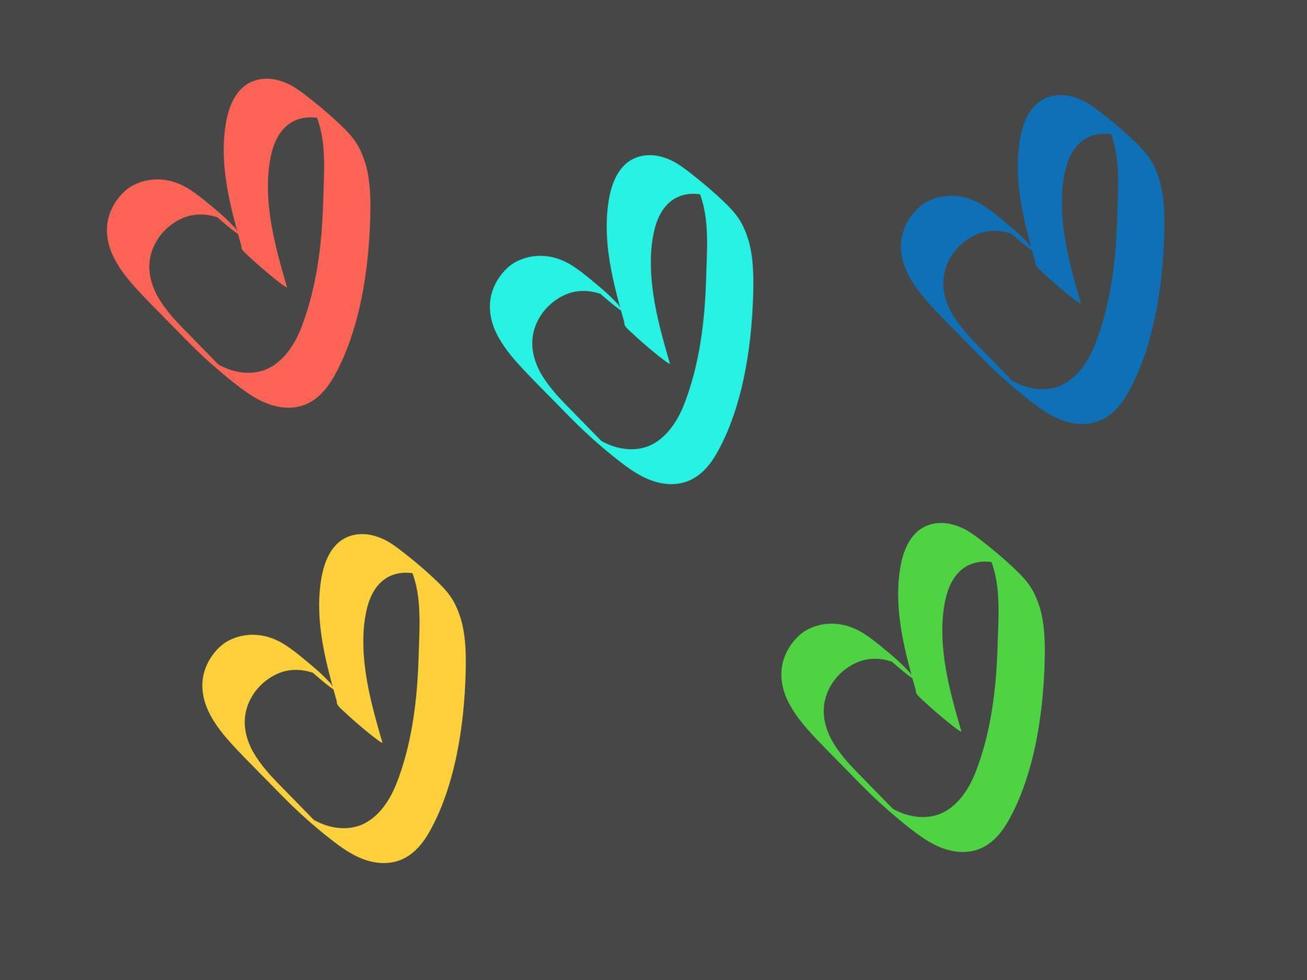 Brush hearts. Stylized illustration of hearts on a dark background. Vector illustration for postcards, business cards, backgrounds.